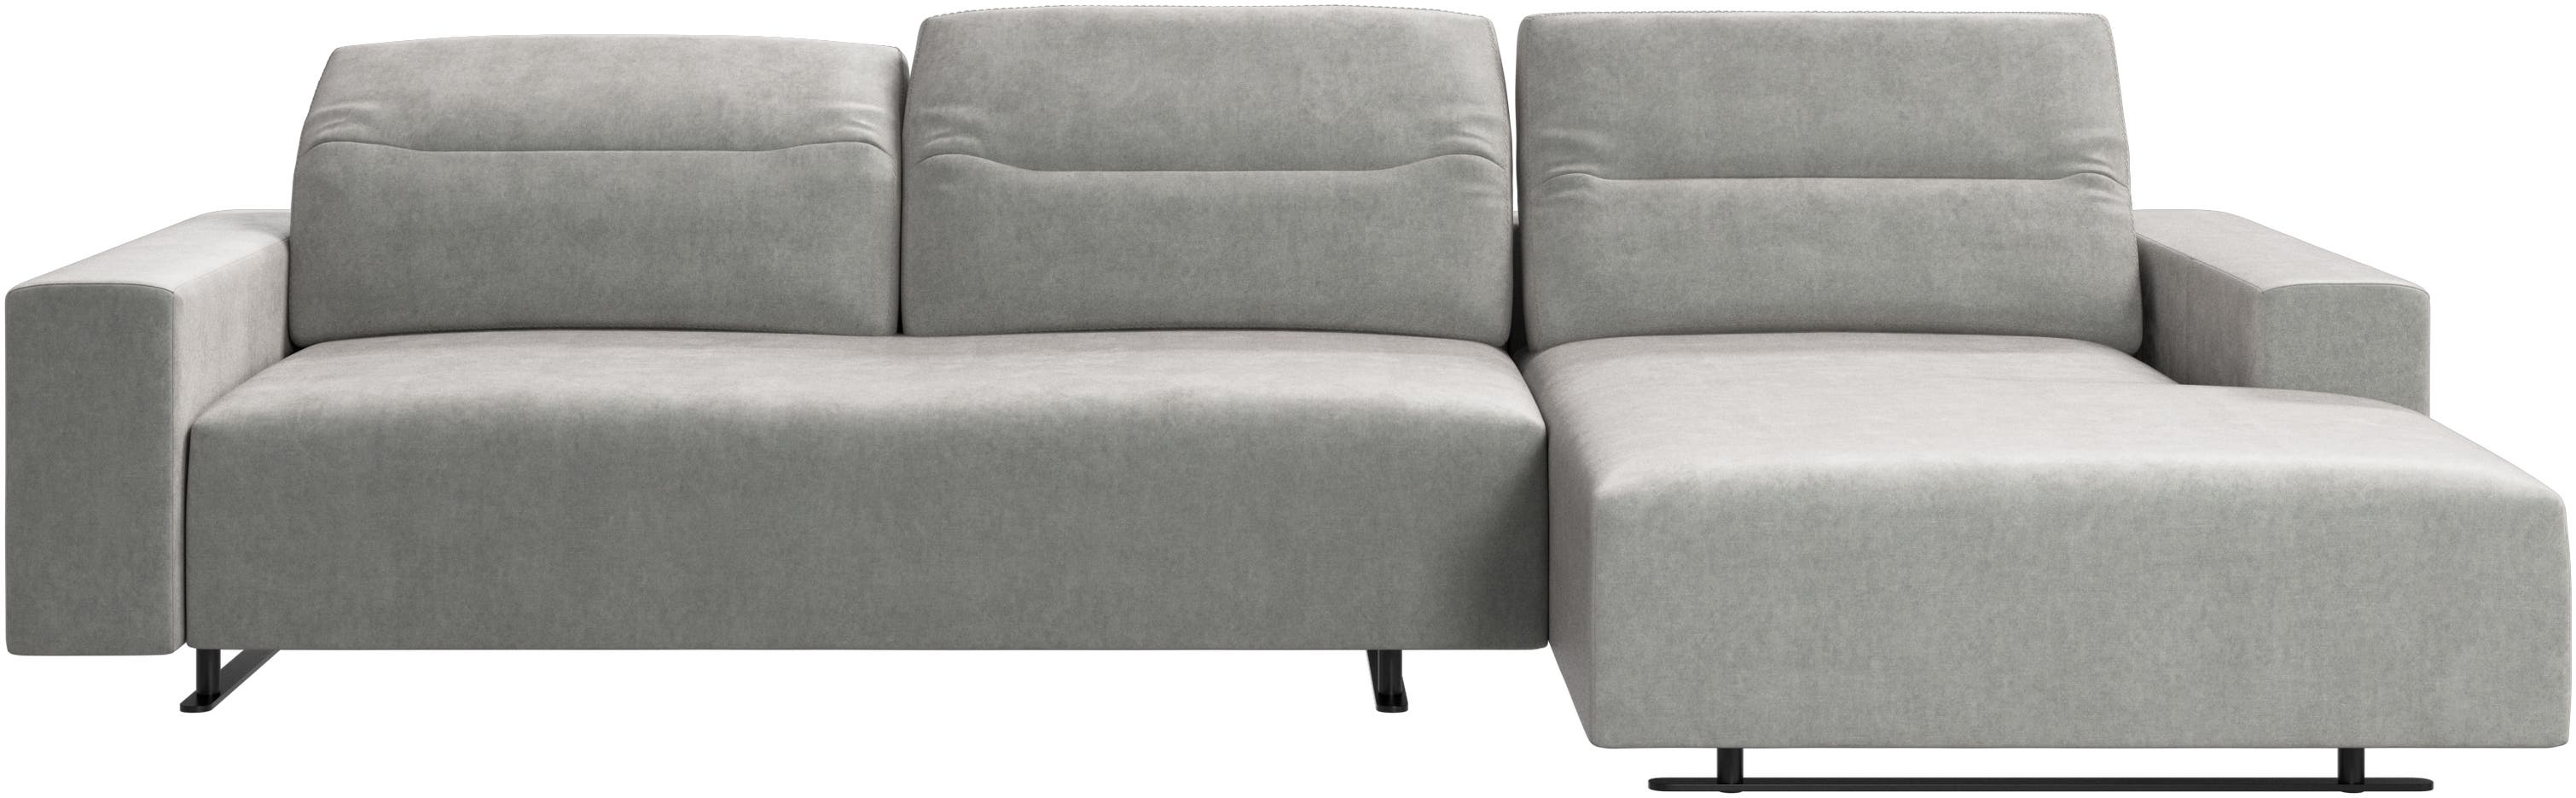 Hampton sofa with adjustable back, resting unit and storage right side